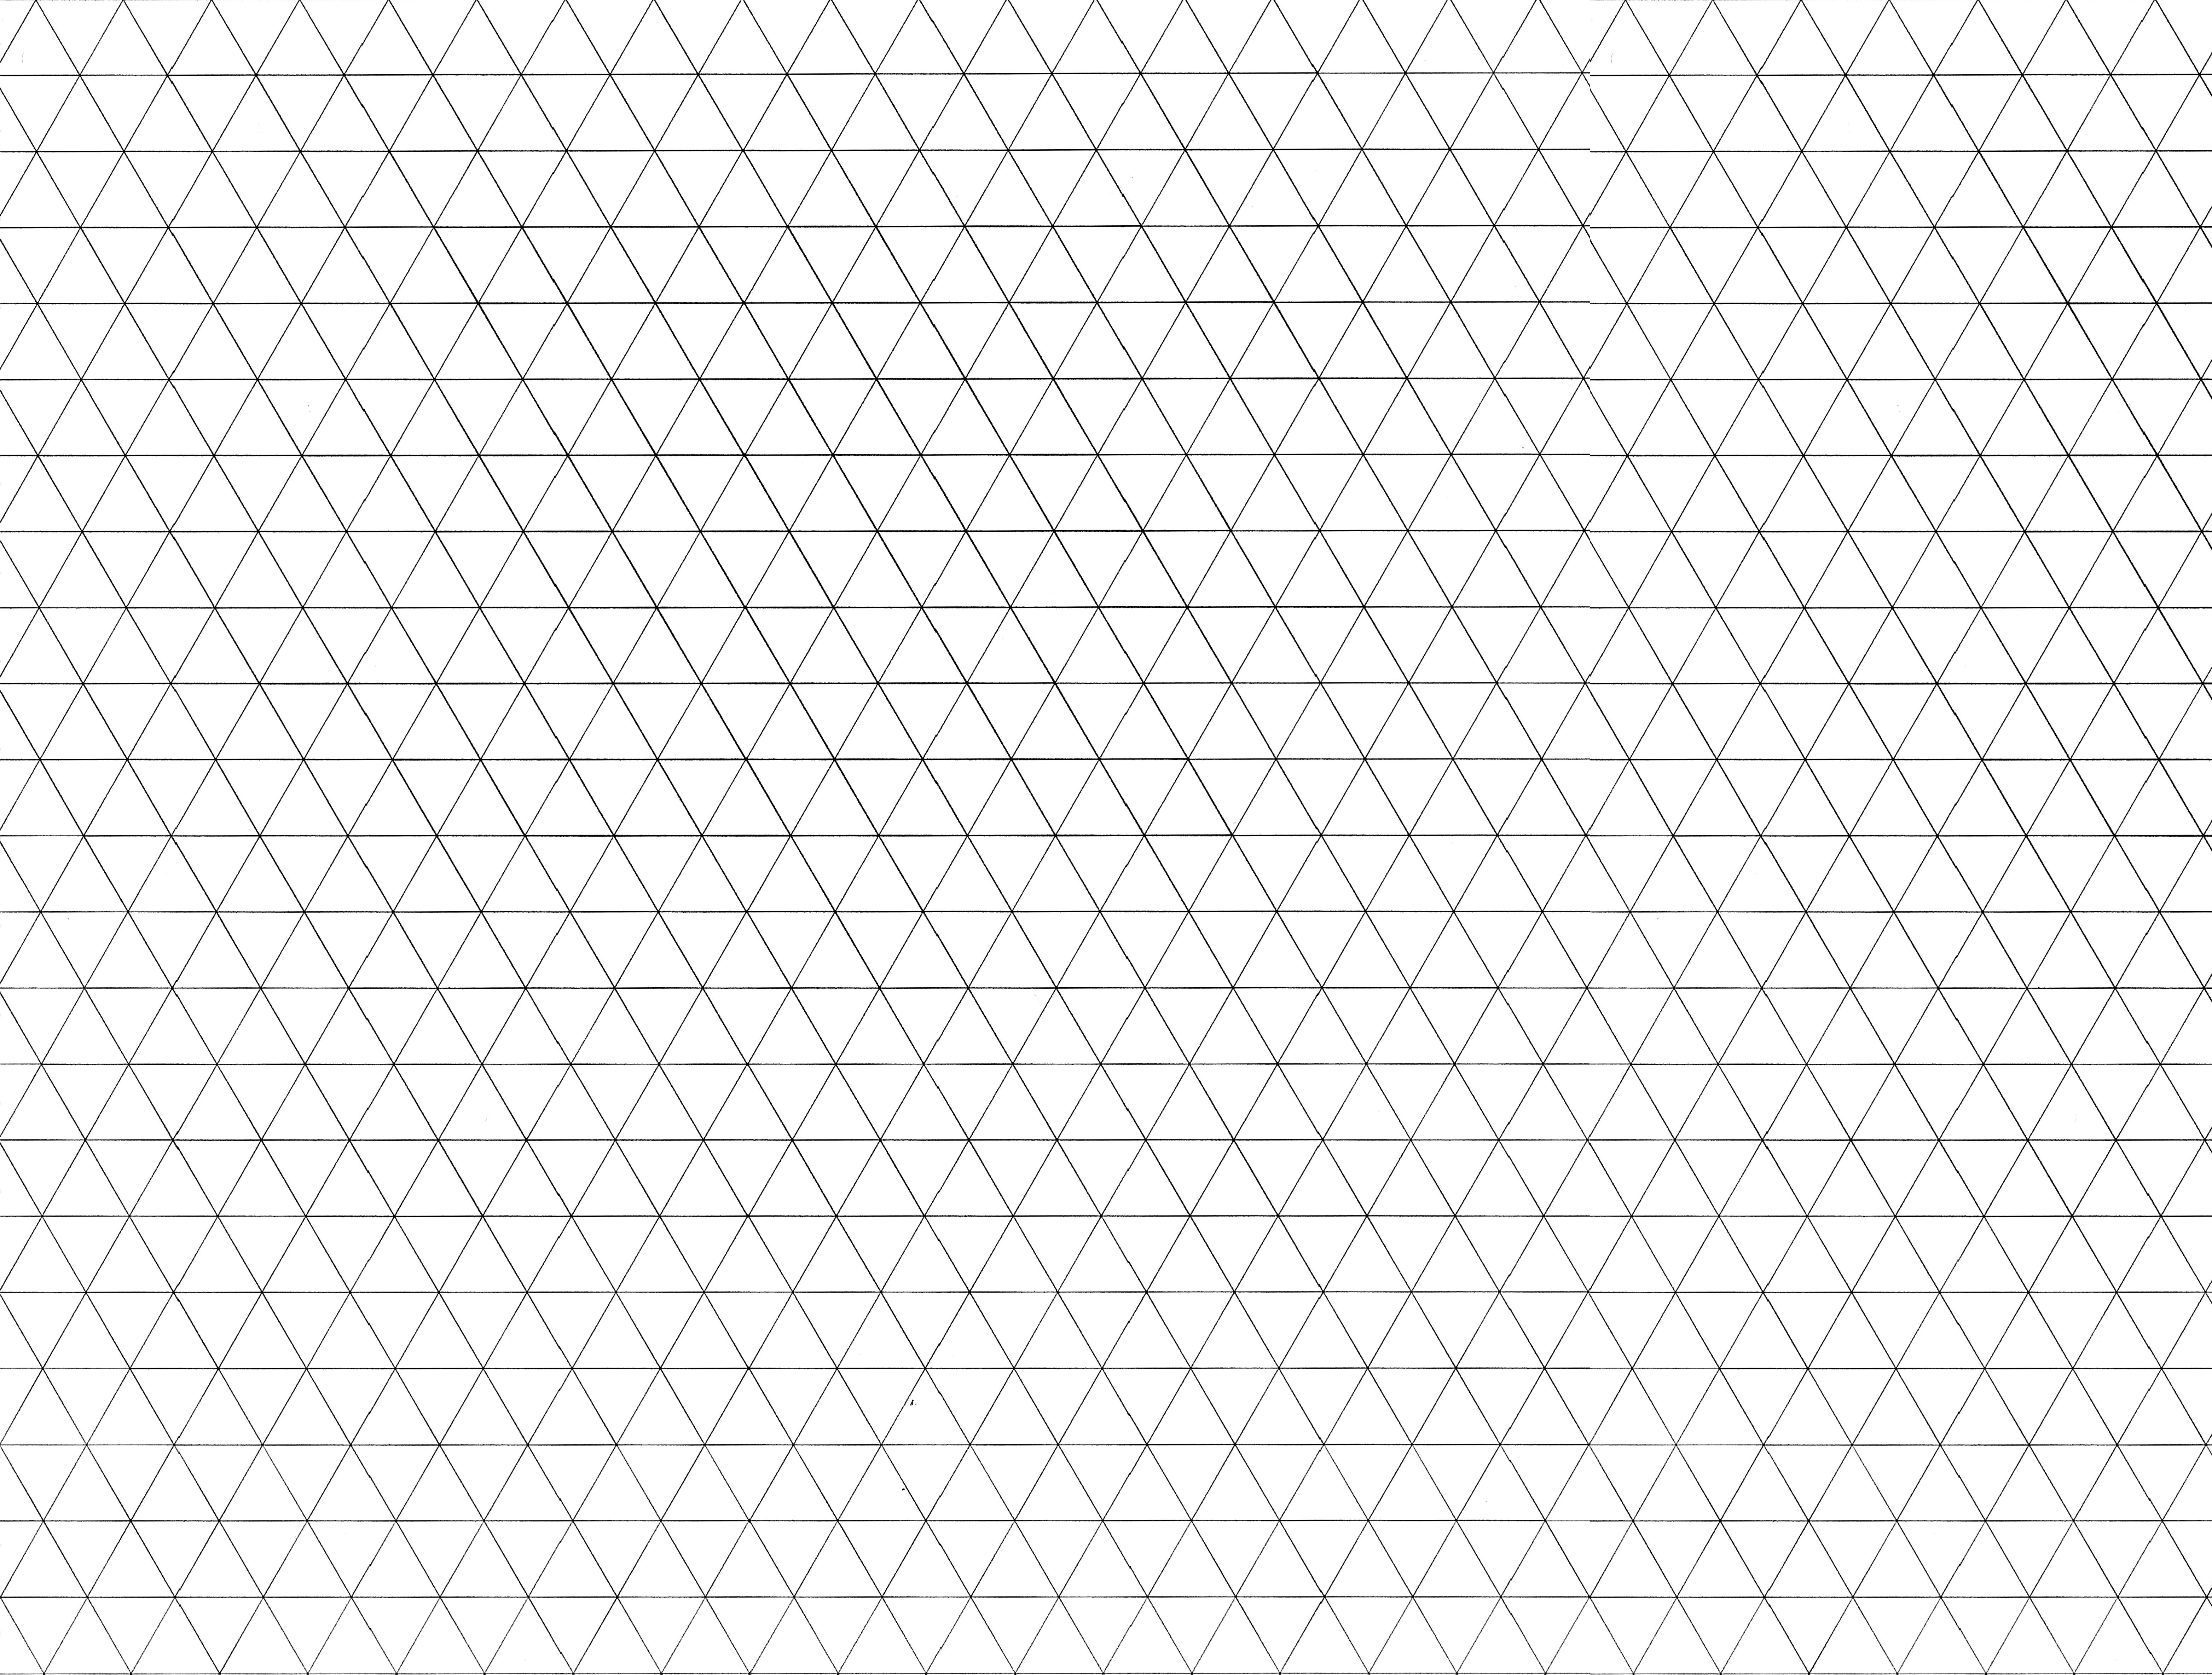 isometric drawing paper at paintingvalleycom explore collection of